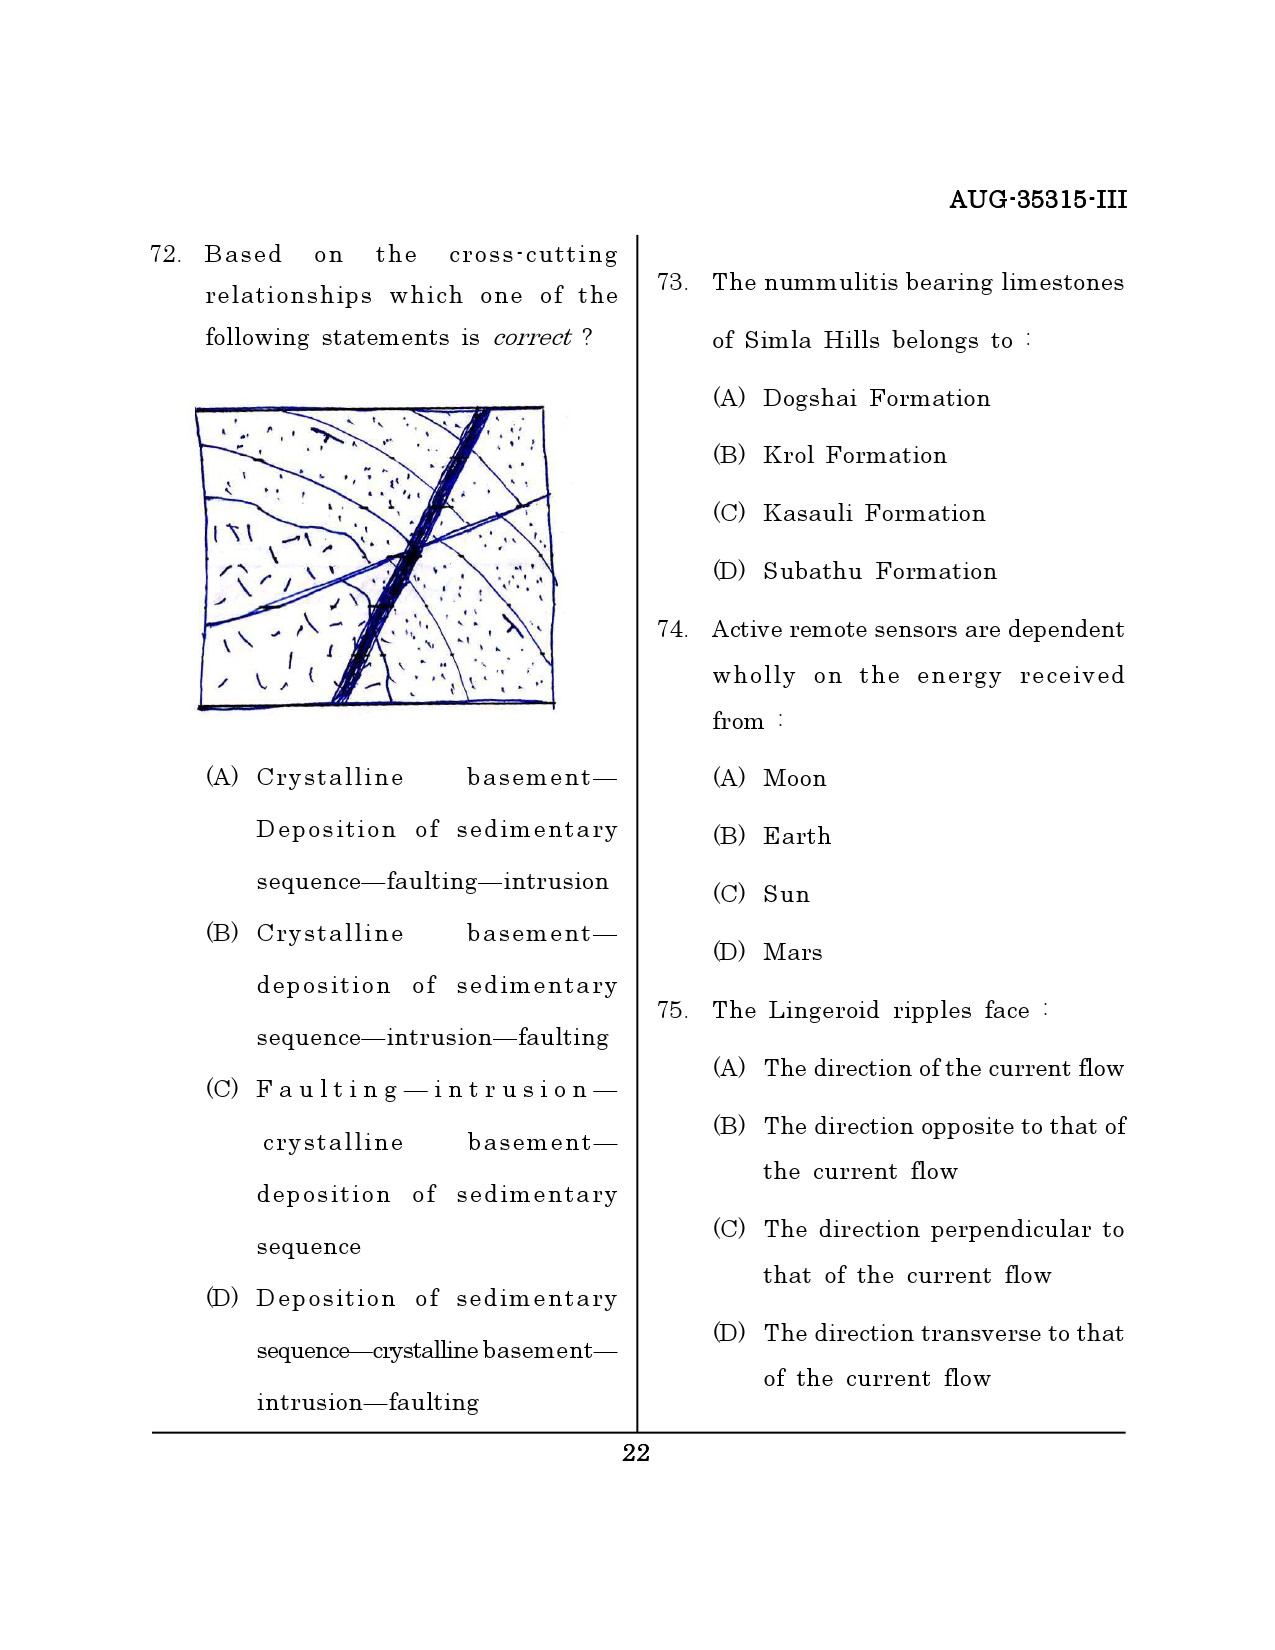 Maharashtra SET Earth Atmospheric Ocean Planetary Science Question Paper III August 2015 21